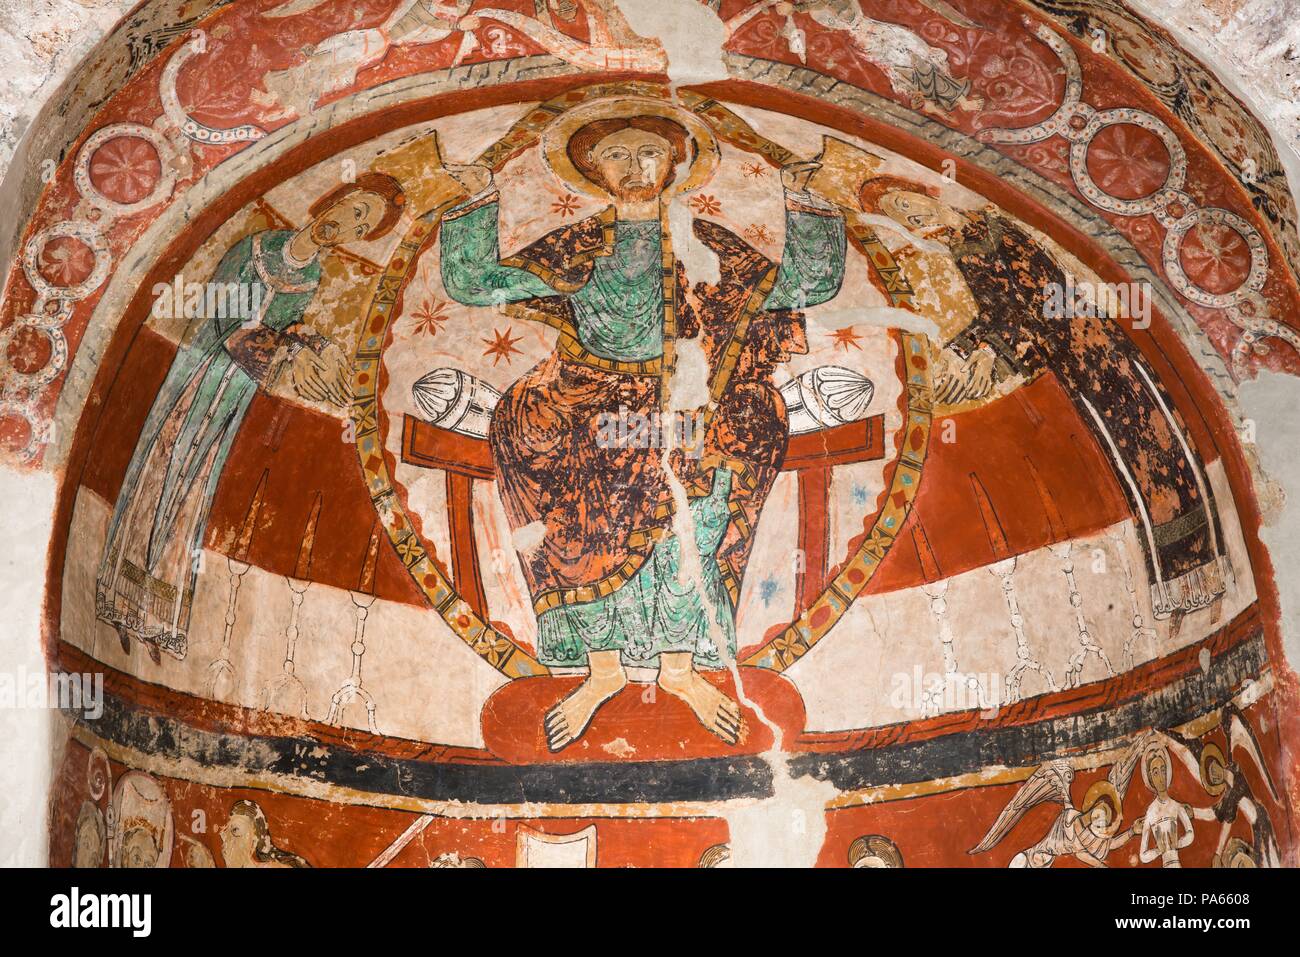 Mural painting in the absidal basin of the apse of the church of Santa María de Terrassa, representing Christ and two characters (possibly Tomás Becket and Edward Grim), Xth Century, Terrassa, Barcelona, Catalonia, Spain. Stock Photo